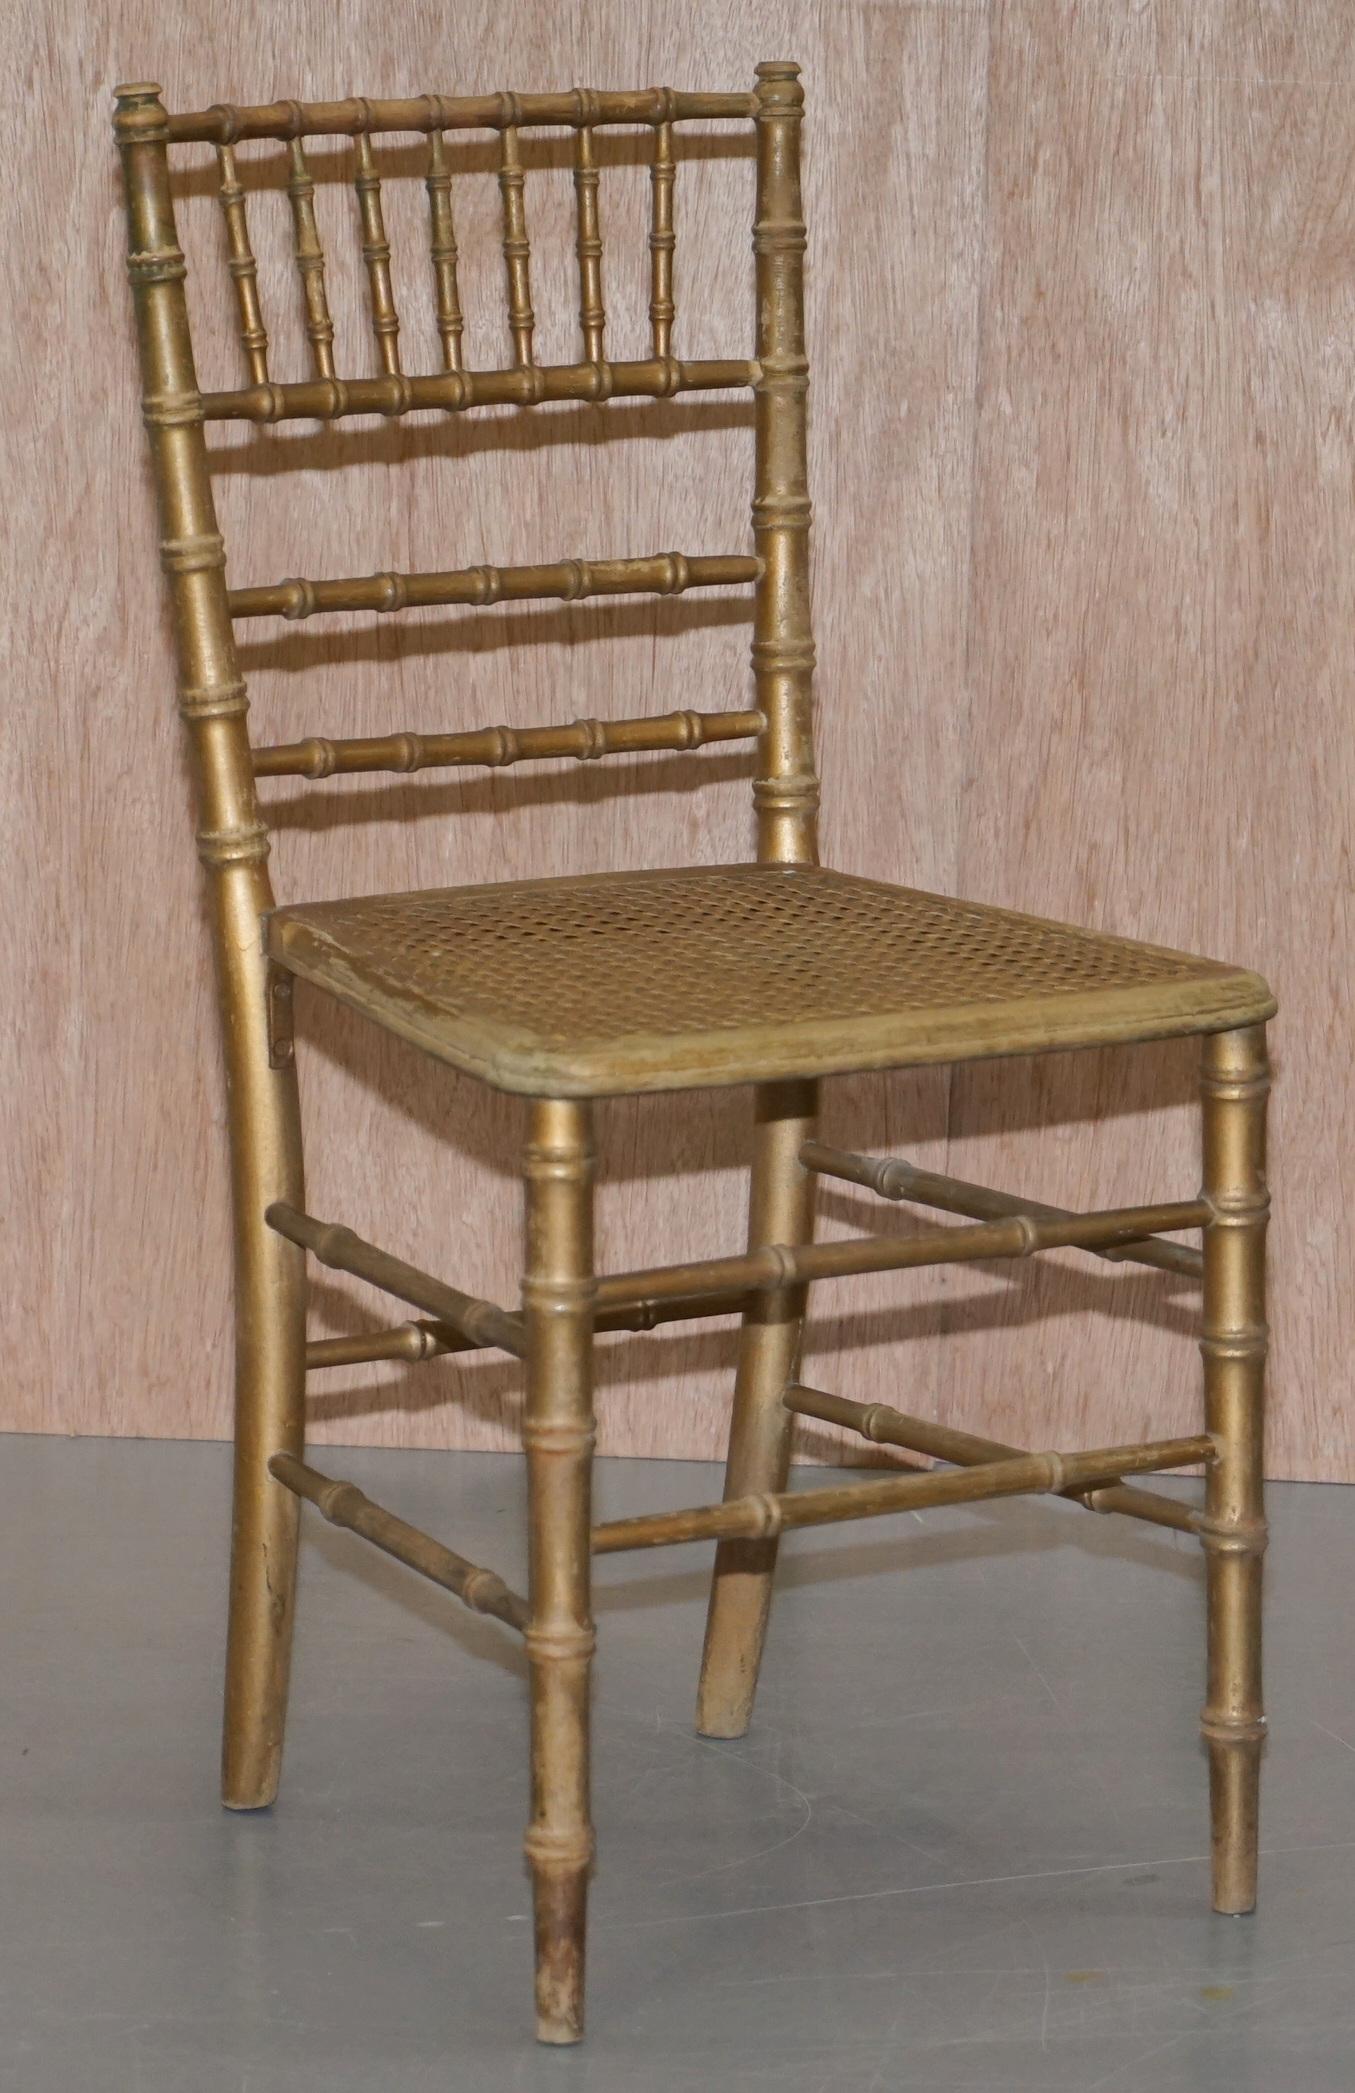 Edwardian Giltwood Famboo Regency Style Berger Chair with Newly Gold Giilt Frame For Sale 7